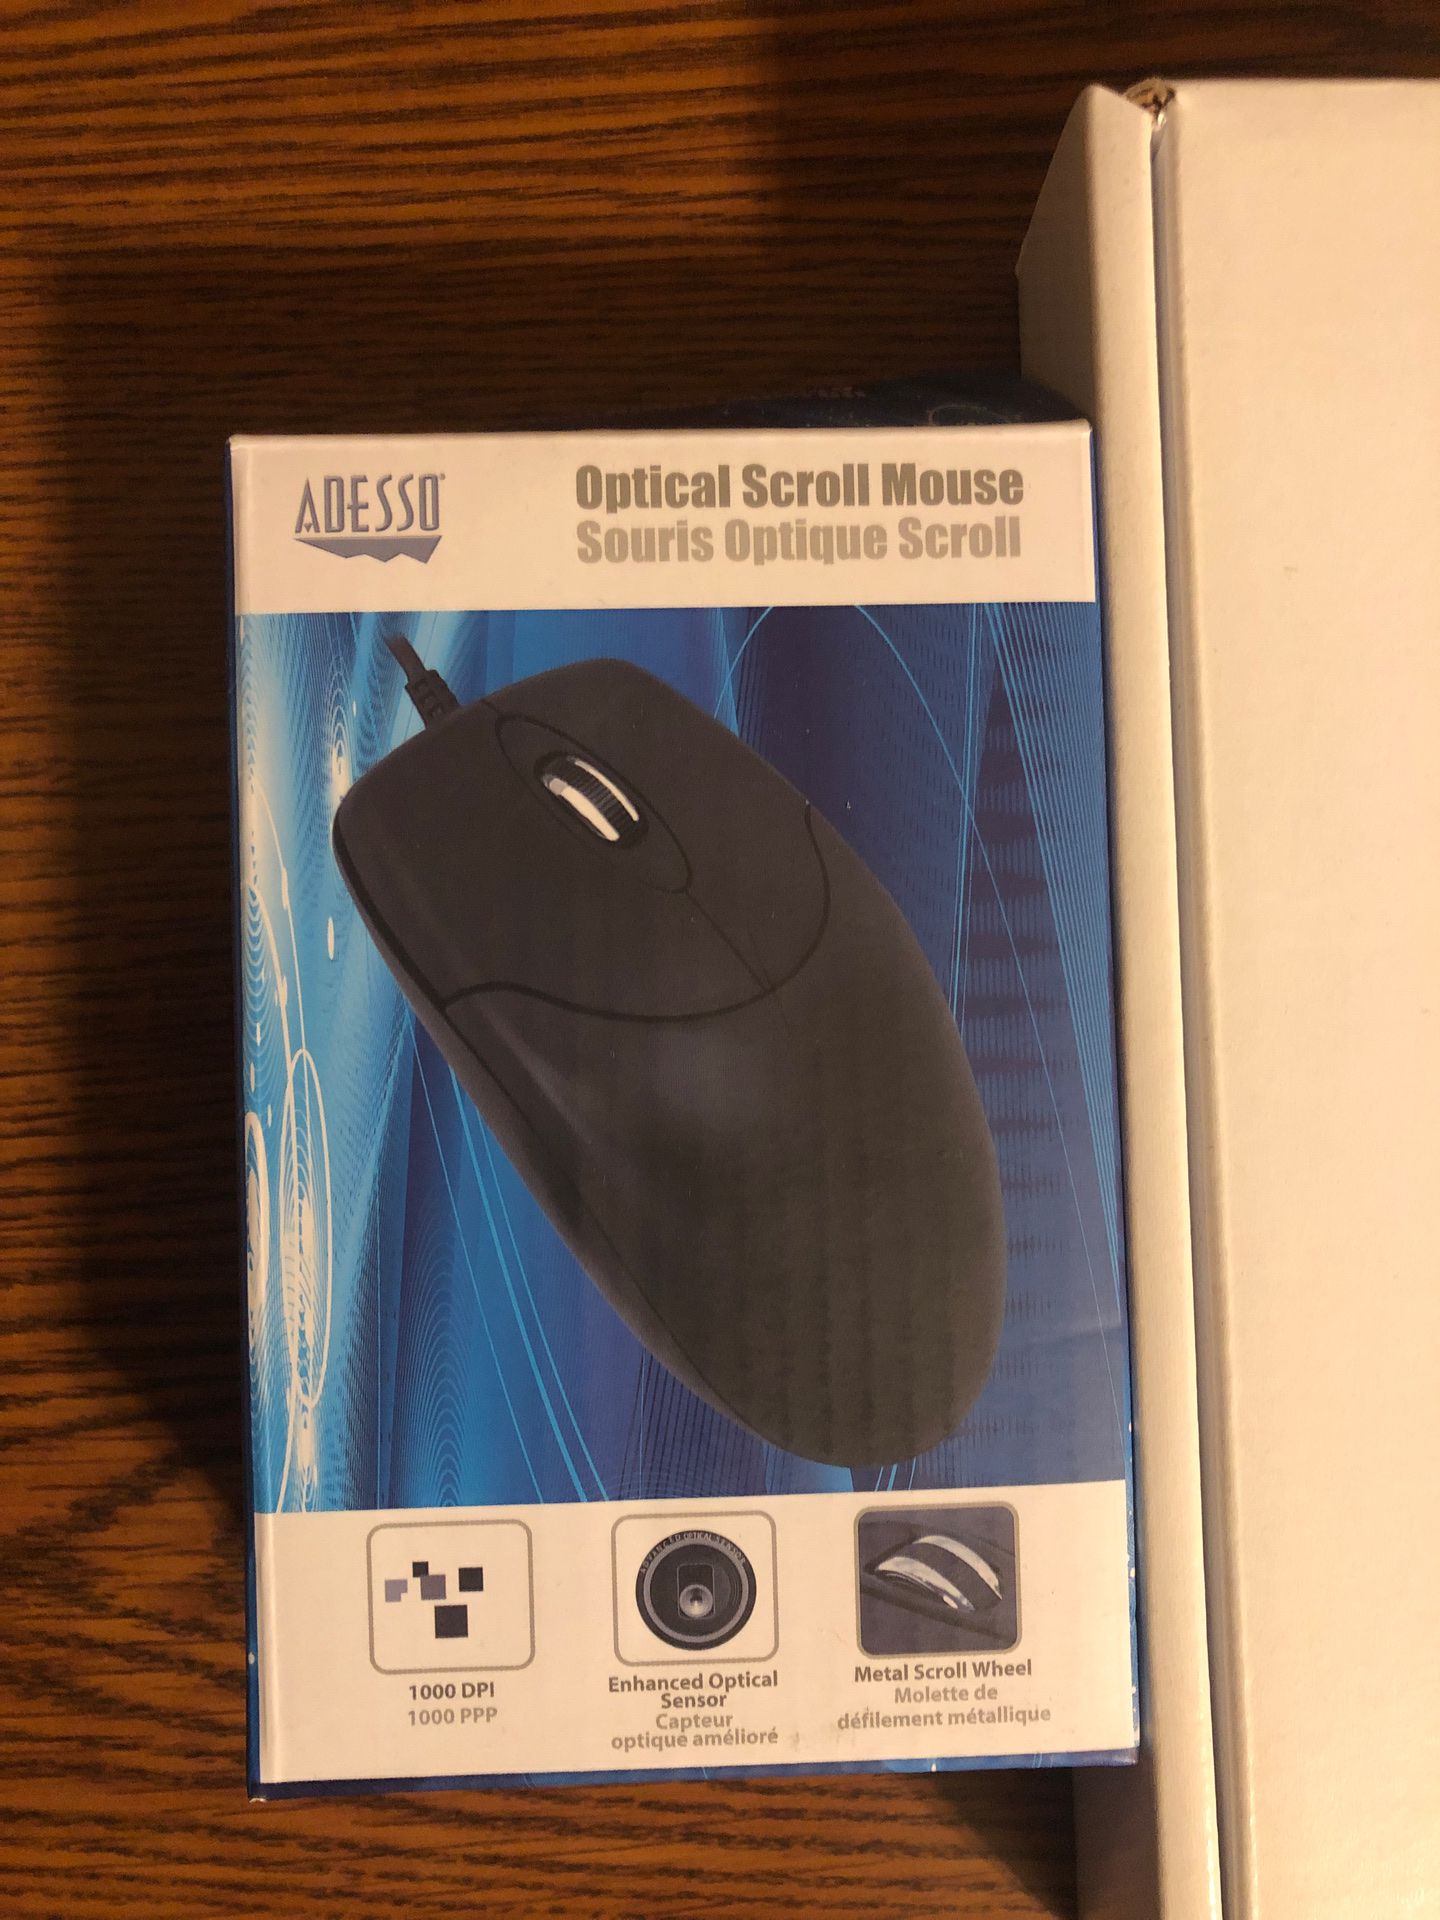 Brand new Keyboard and Mouse